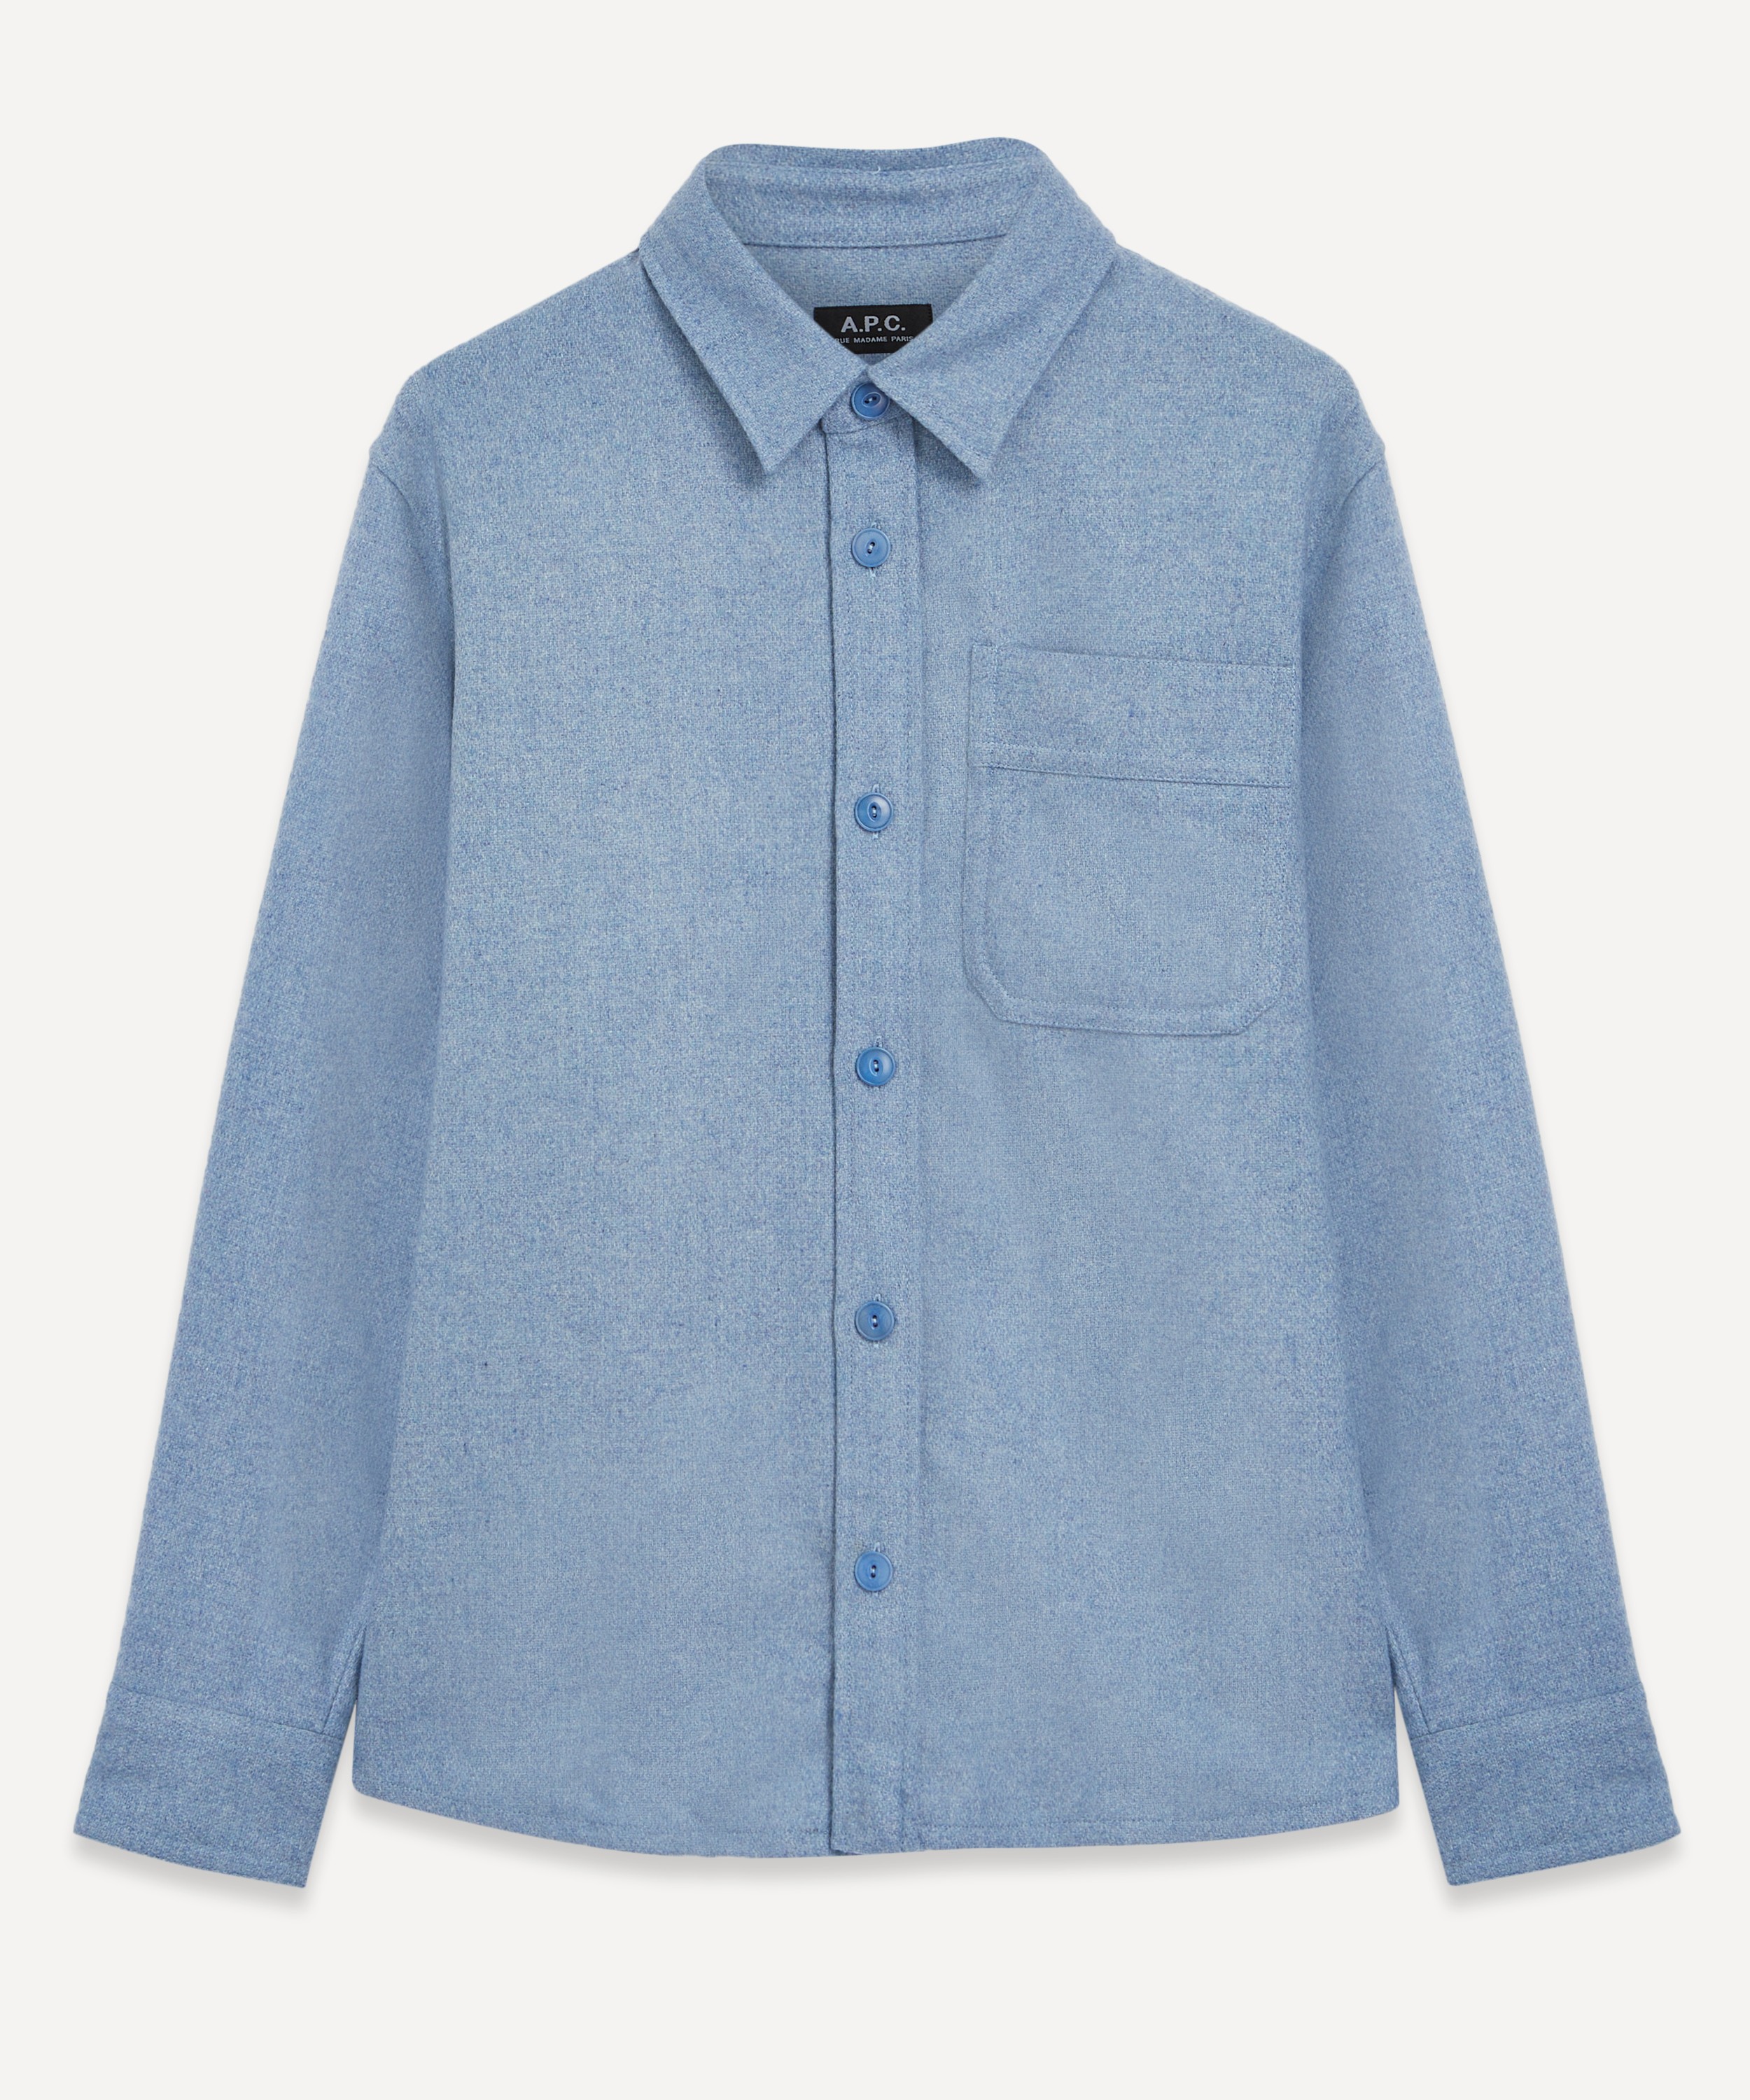 A.P.C. - Basile Wool-Blend Overshirt image number null